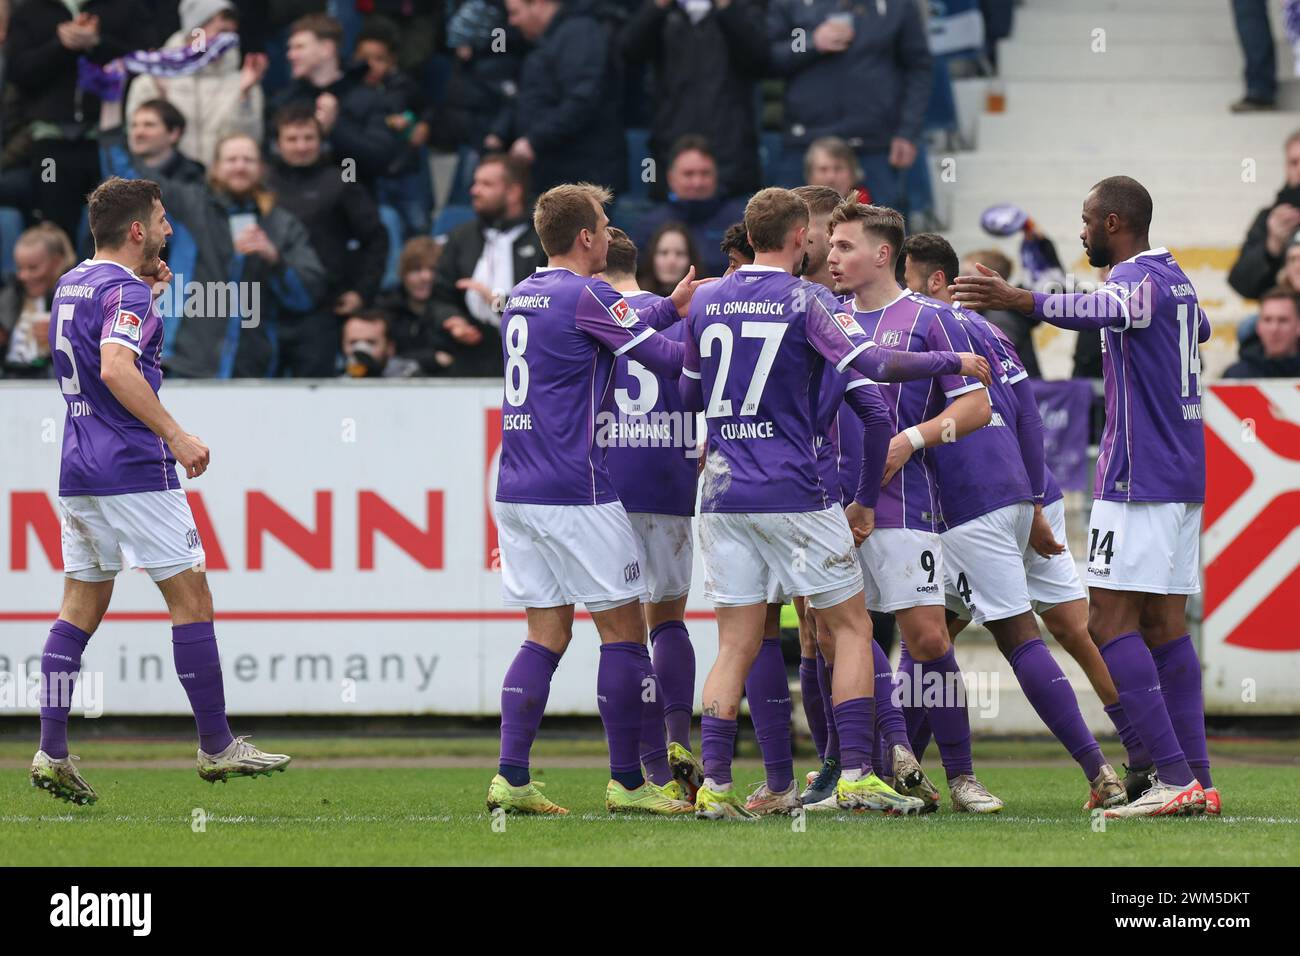 24 February 2024, Lower Saxony, Osnabrück: Soccer: Bundesliga 2, VfL Osnabrück - Hannover 96, matchday 23 at the Stadion an der Bremer Brücke. Osnabrück's goalscorer Erik Engelhardt (3rd from right) celebrates his goal for 1:0 with Bashkim Ajdini (l-r), Robert Tesche, Florian Kleinhansl, Michael Cuisance, Maxwell Gyamfi and Oumar Diakhite. Photo: Friso Gentsch/dpa - IMPORTANT NOTE: In accordance with the regulations of the DFL German Football League and the DFB German Football Association, it is prohibited to utilize or have utilized photographs taken in the stadium and/or of the match in the Stock Photo